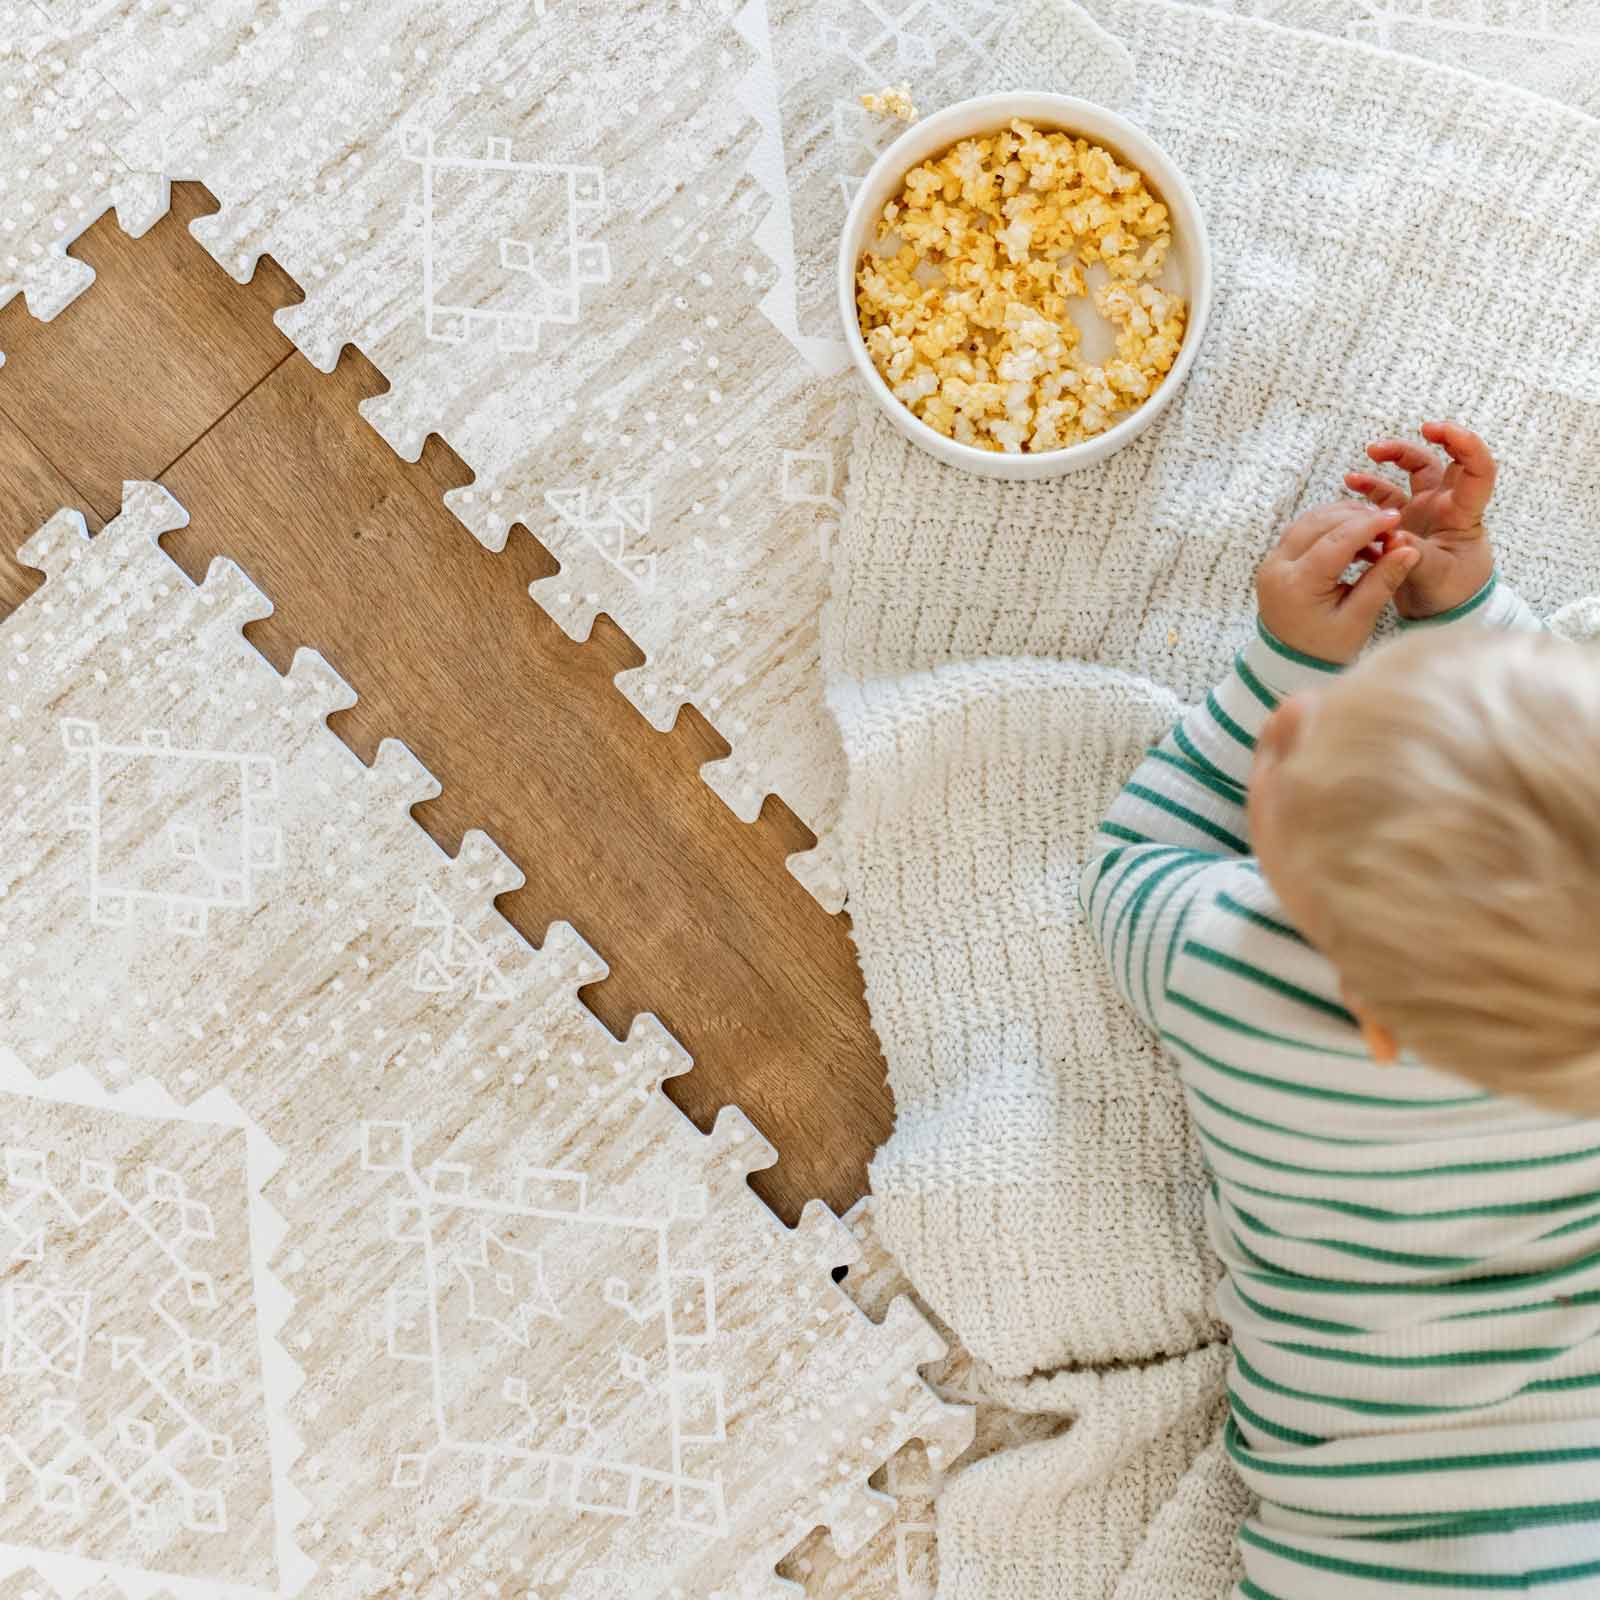 Ula straw neutral tan boho print play mat shown with 1 tile exposed and toddler laying on the mat eating popcorn